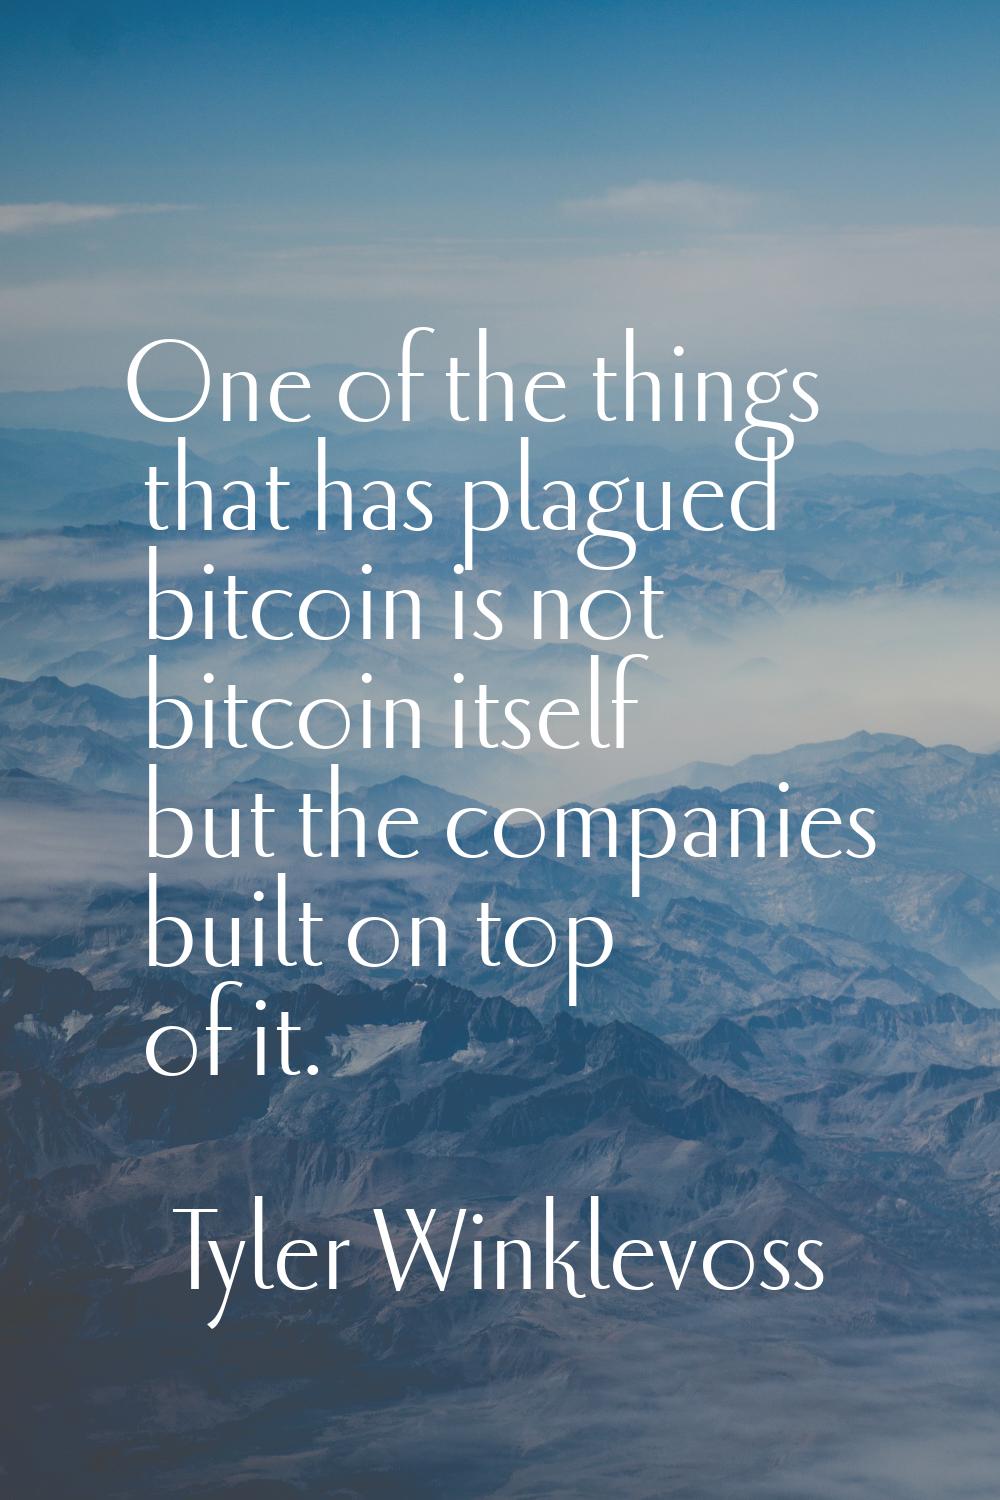 One of the things that has plagued bitcoin is not bitcoin itself but the companies built on top of 